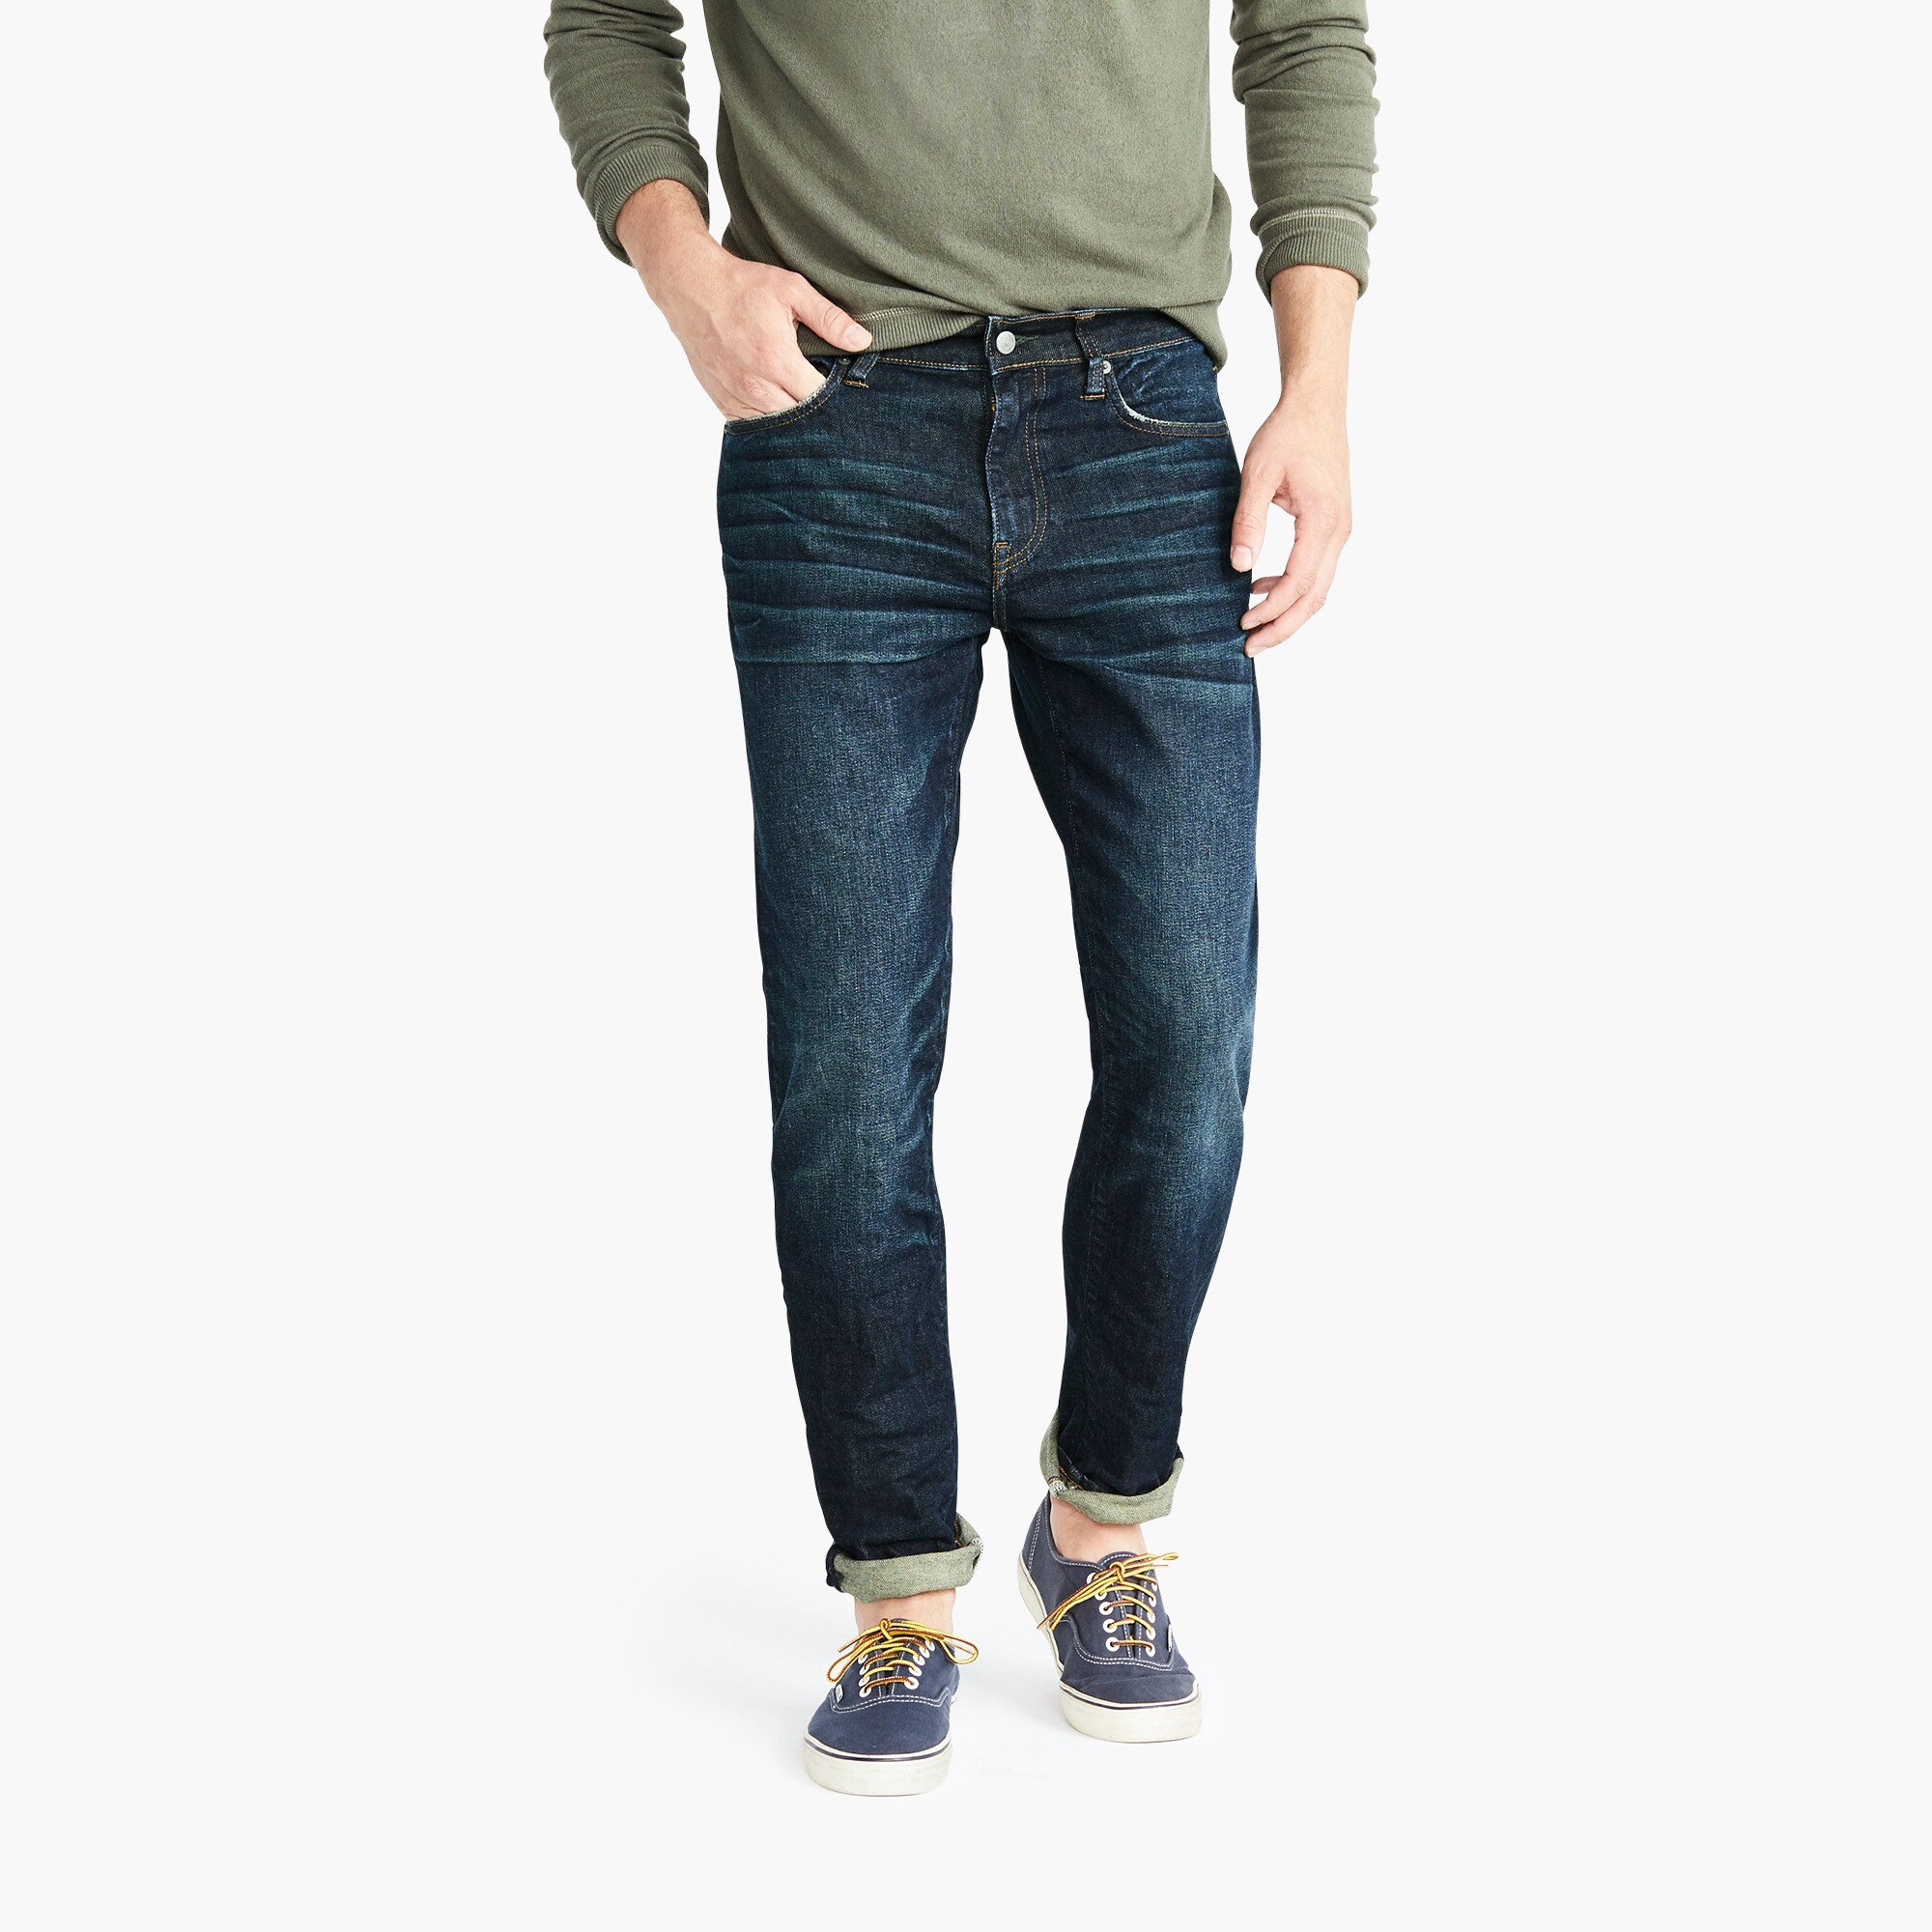 narrow fitting jeans